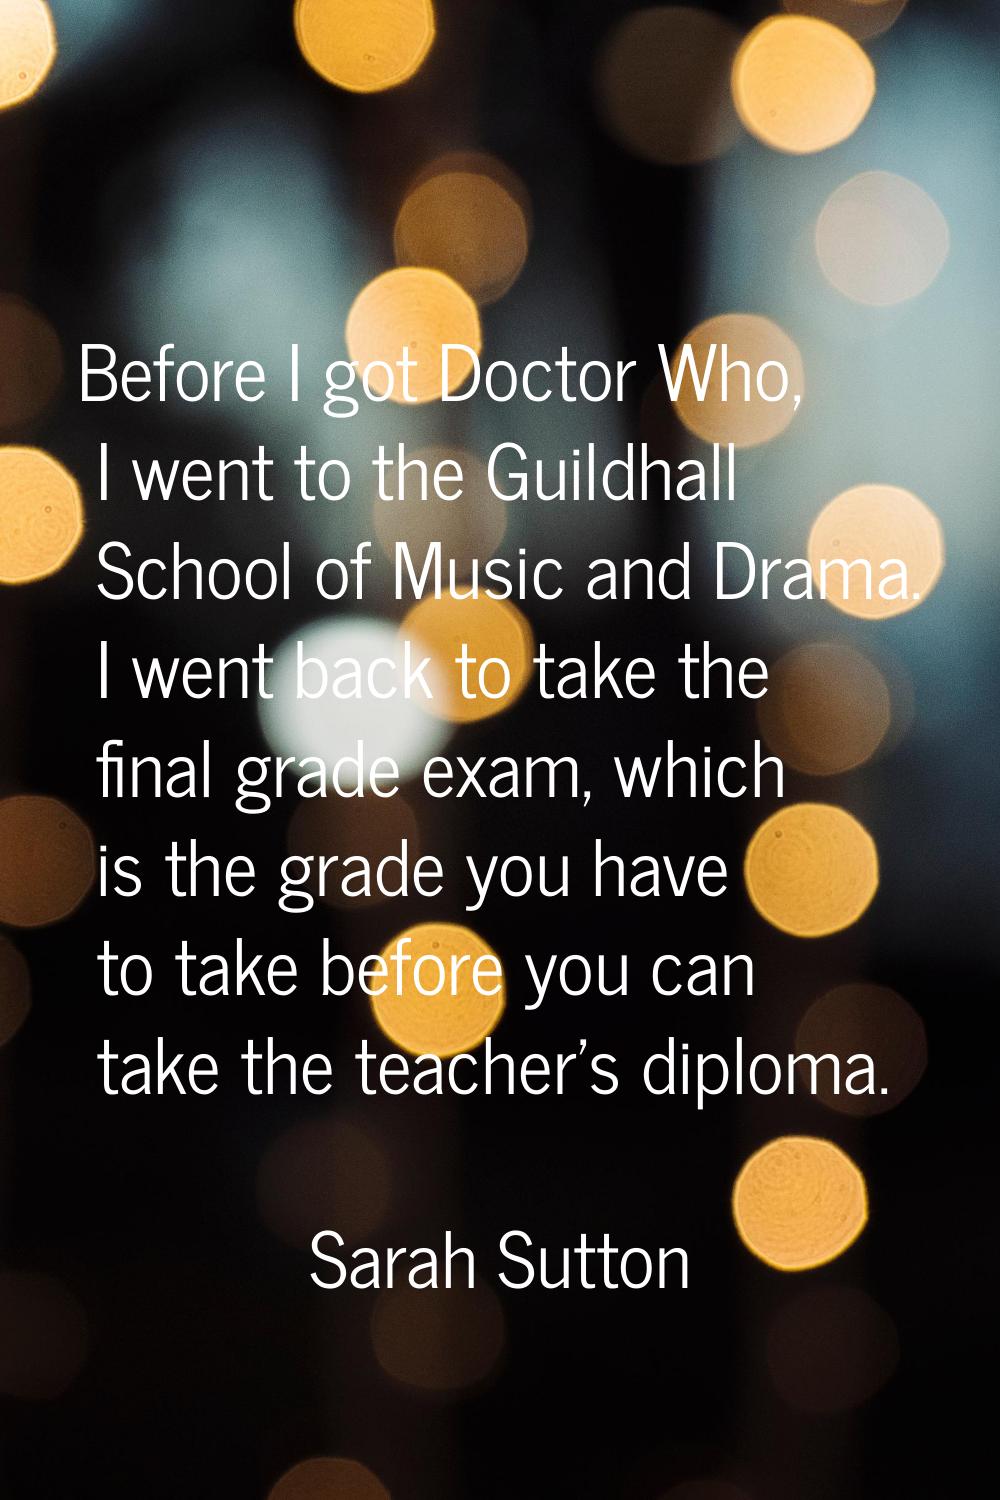 Before I got Doctor Who, I went to the Guildhall School of Music and Drama. I went back to take the